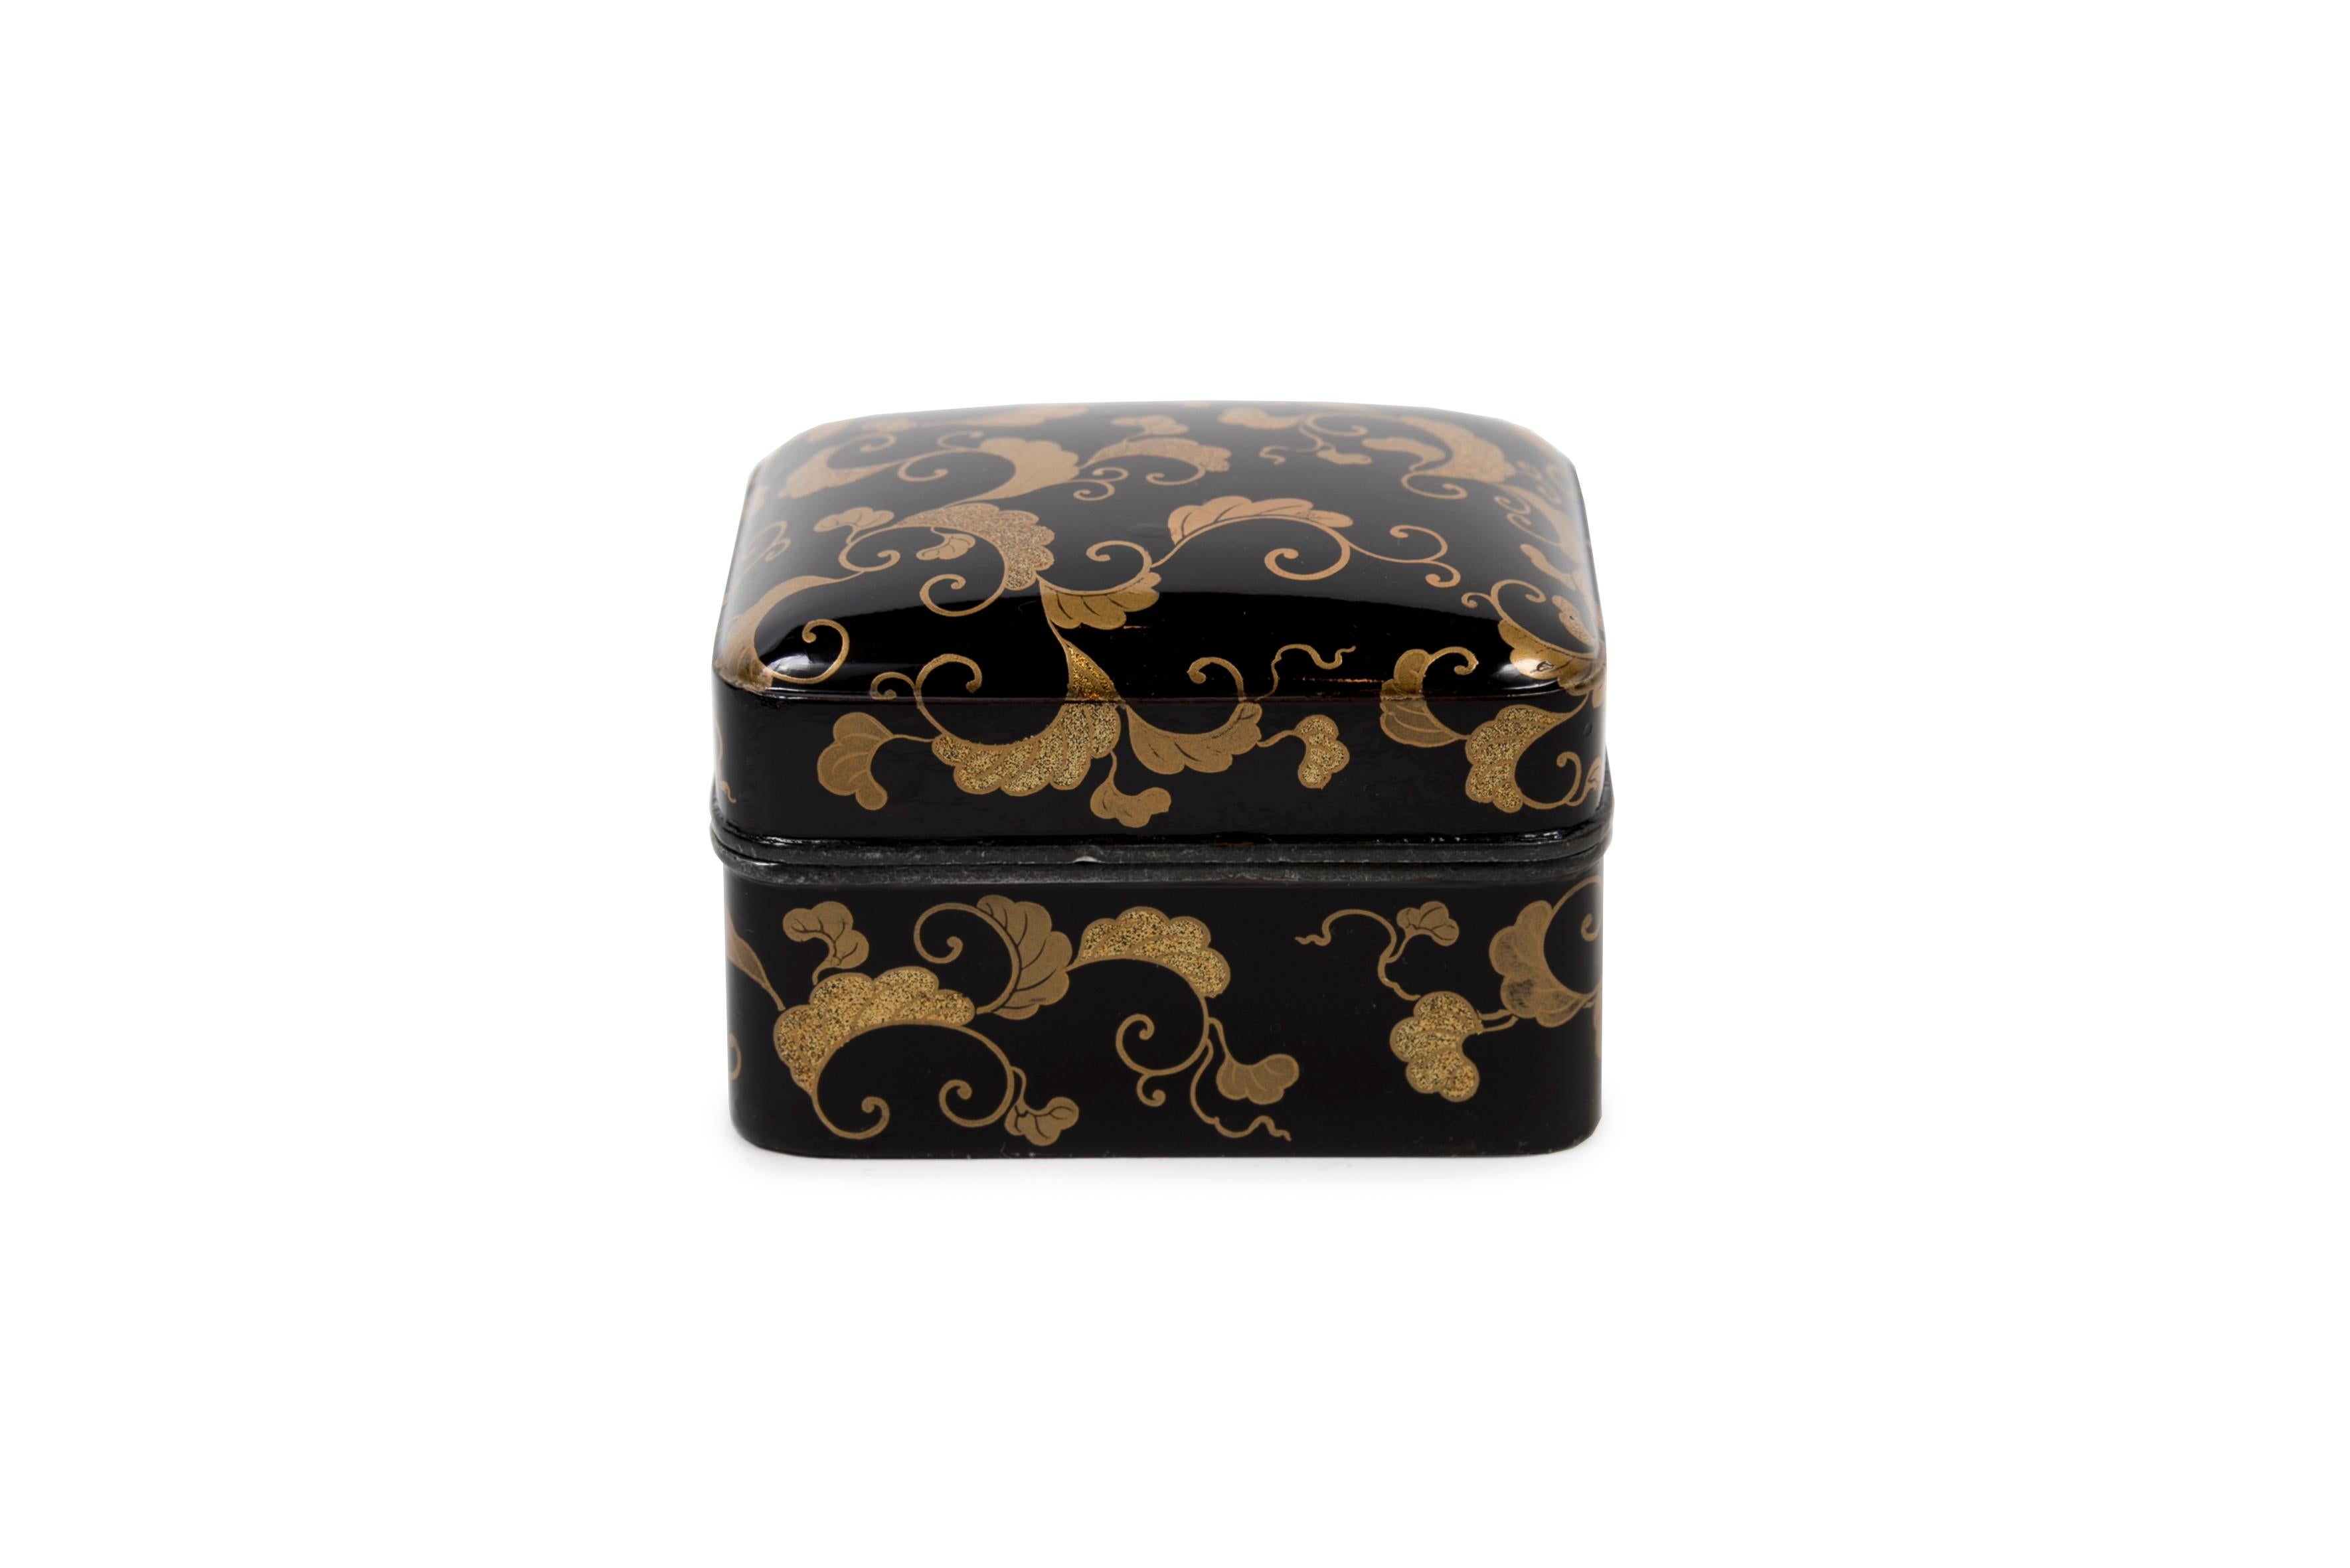 Kobako box decorated with stylized foliage in black and gold hiramaki-e lacquer. The motif is karakusa, a growing plant extending in all directions. It symbols prosperity and longevity.
Interior is lined with a floral fabric and topped with a pewter